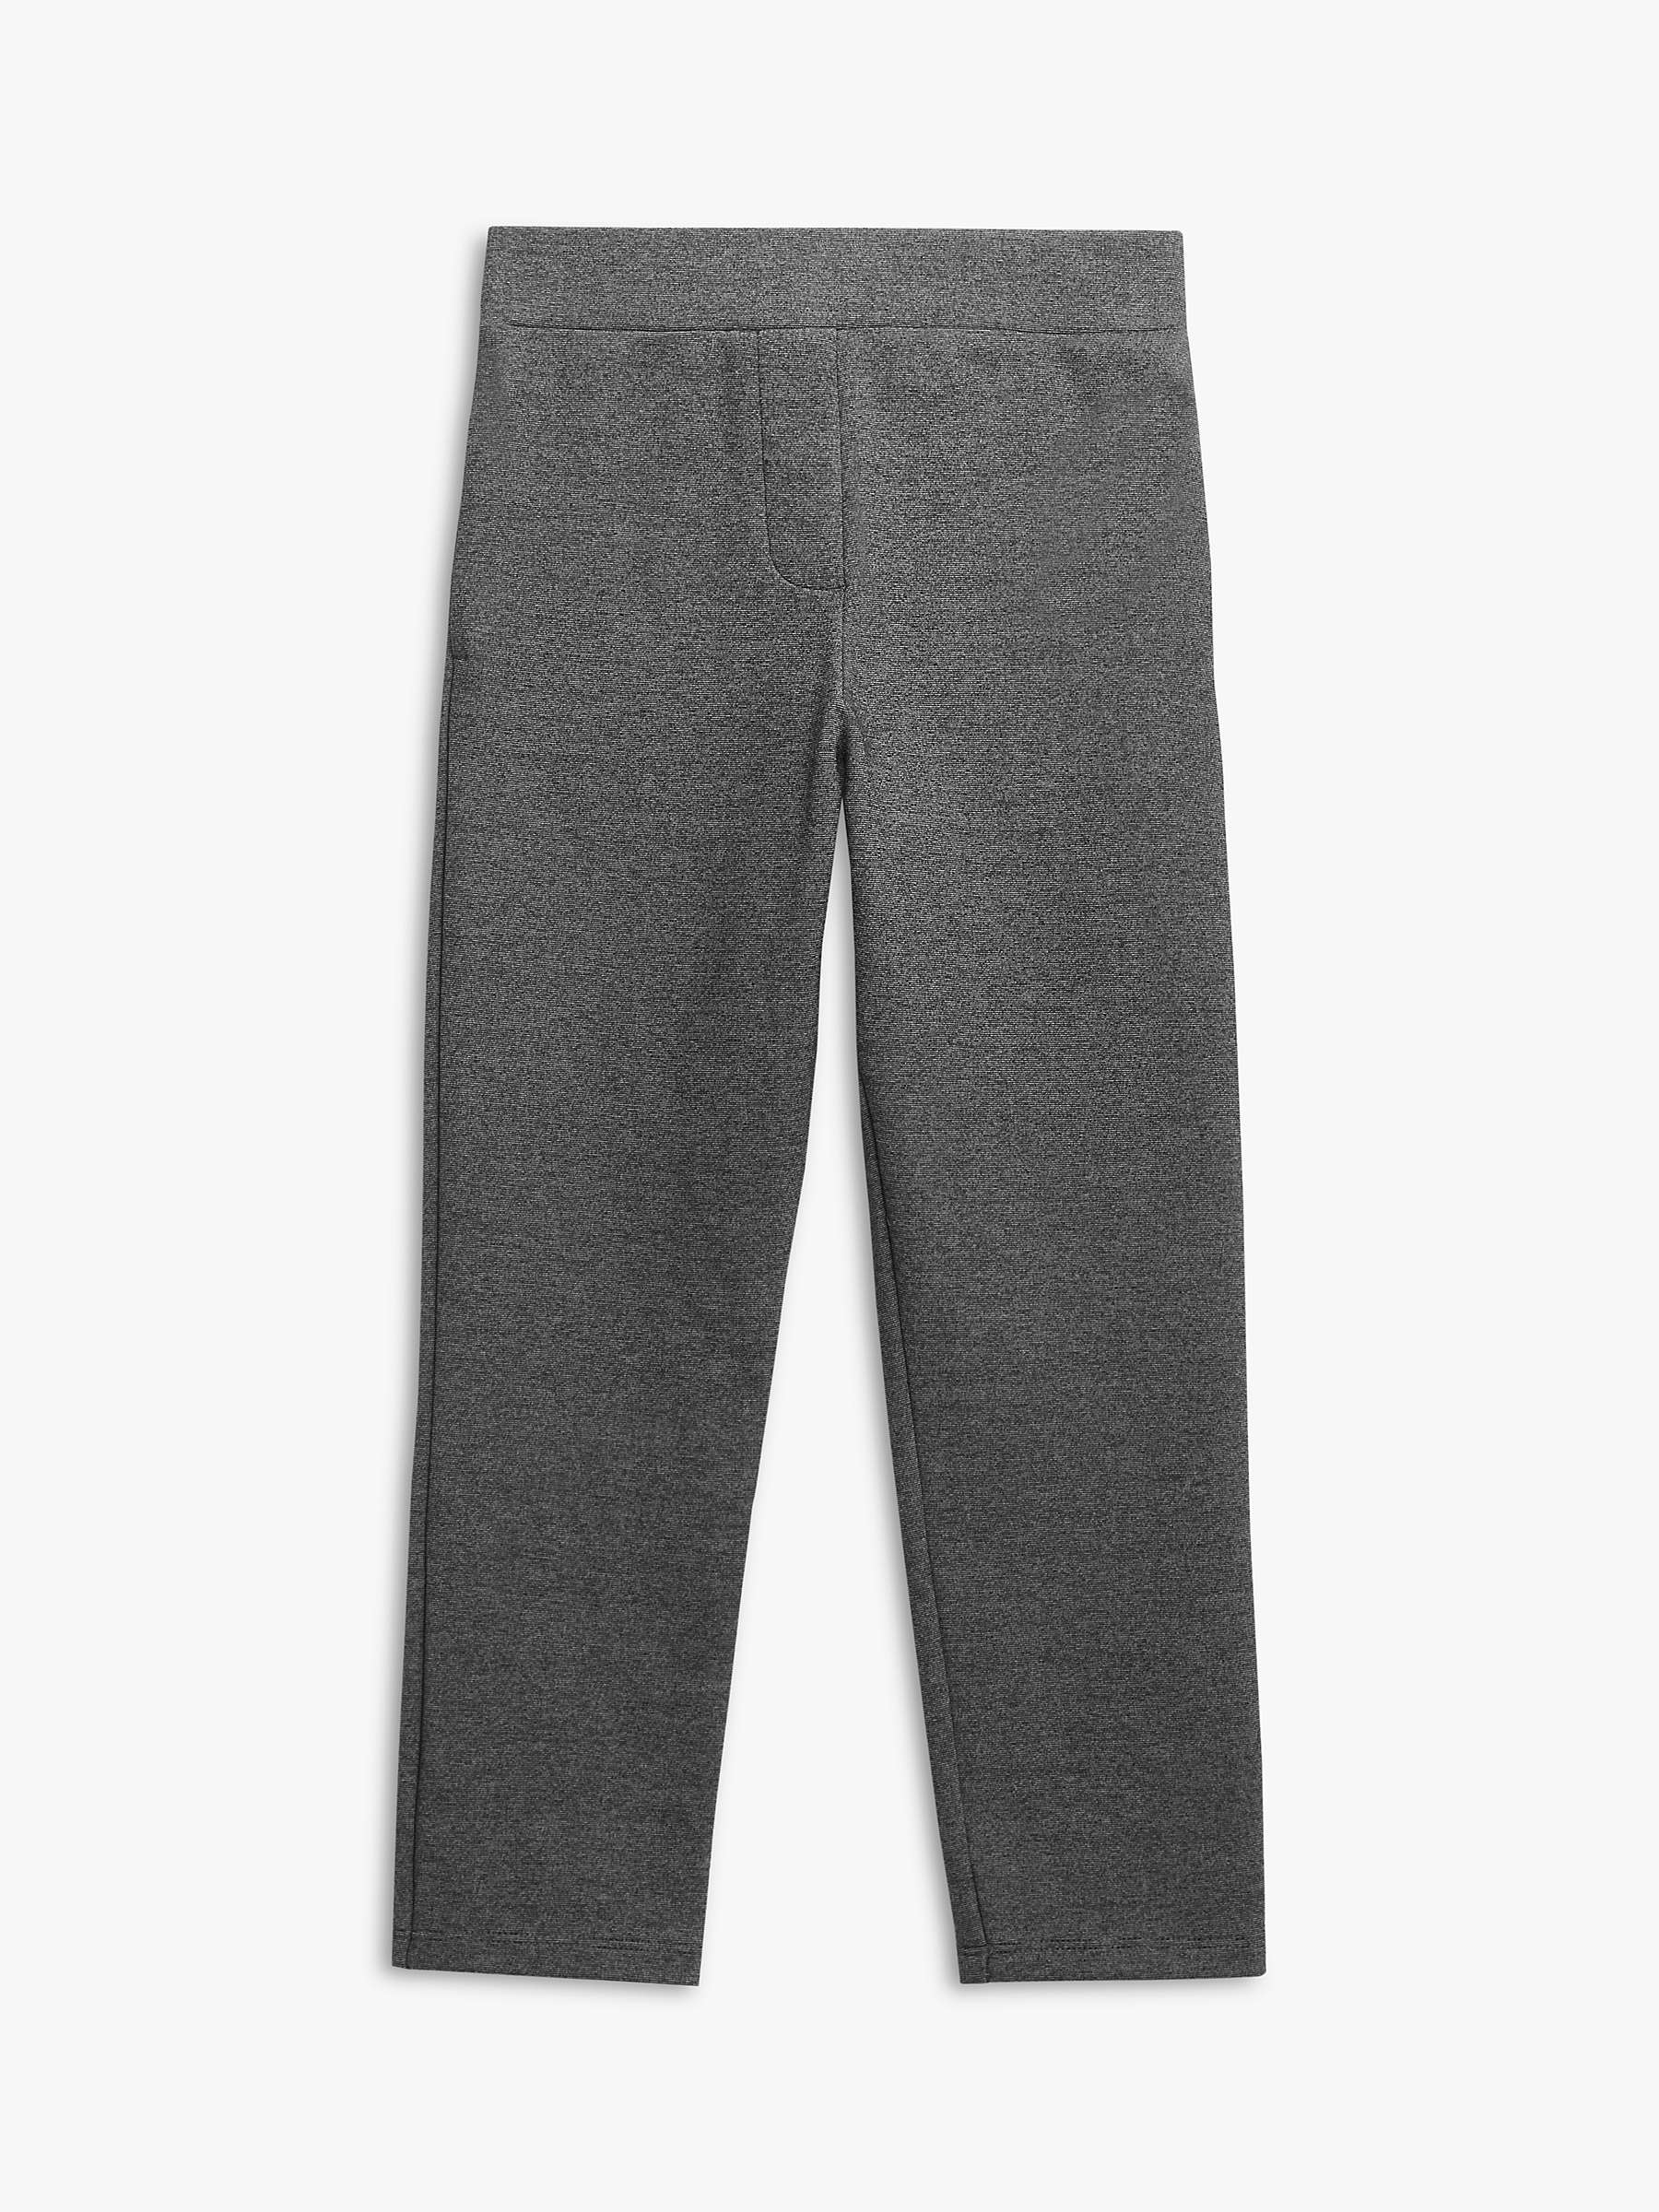 Buy John Lewis Pull-On Jersey School Trousers, Grey Online at johnlewis.com